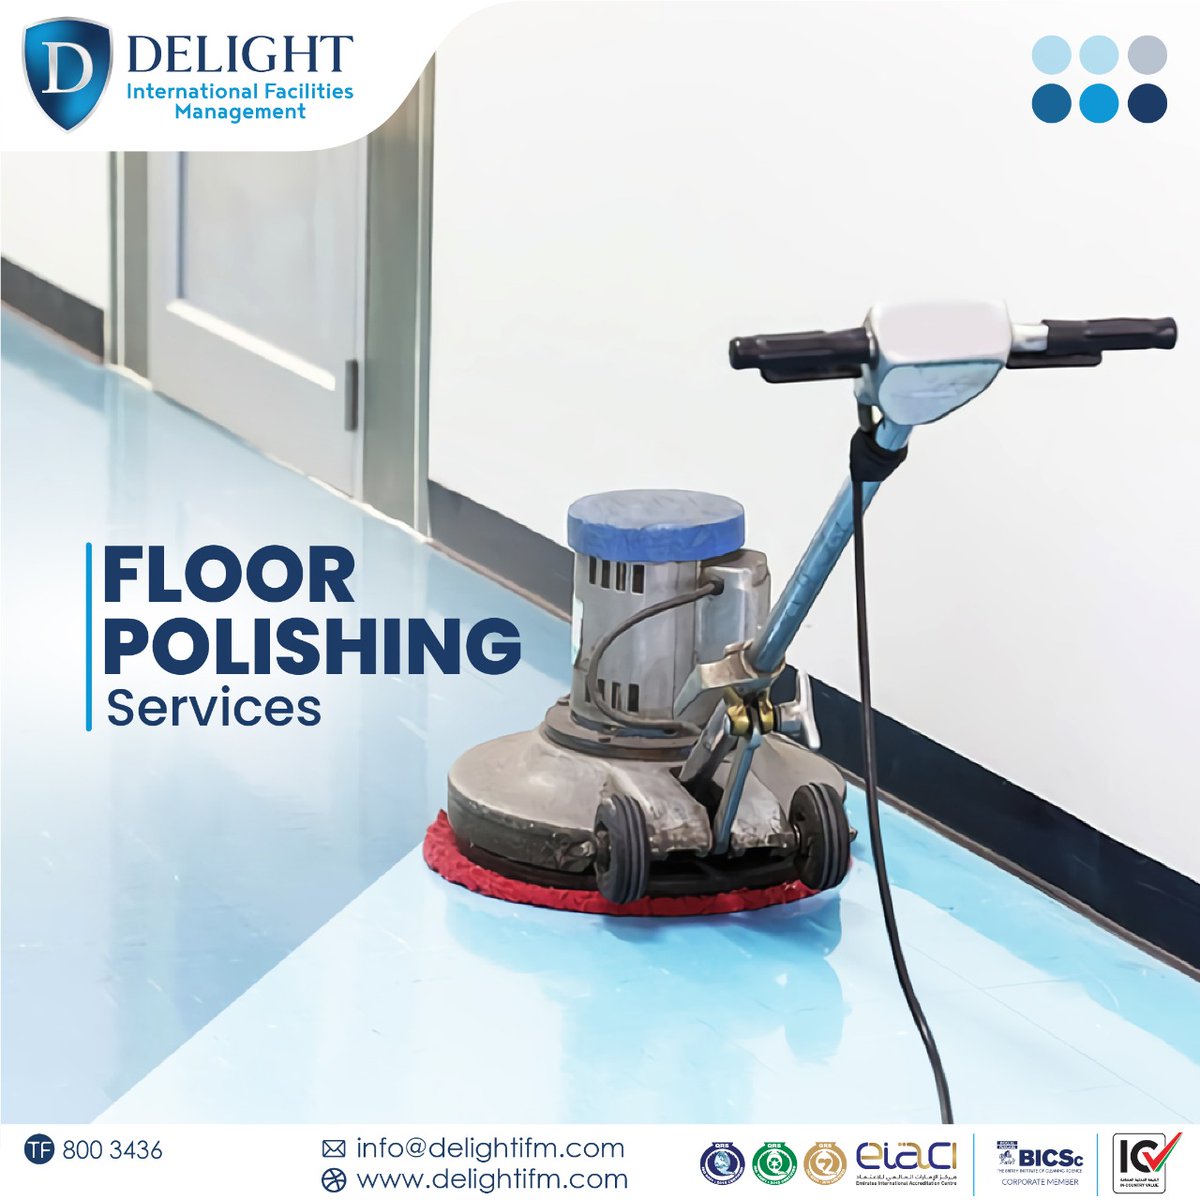 Shine the floor with our professional floor polishing services. 
Call now for a free quote : 800 3436

#floorpolishing #floorcleaning #floorcleaningservices  #floor #cleaningservices #dubai #abudhabi #uae #cleaningservicesdubai